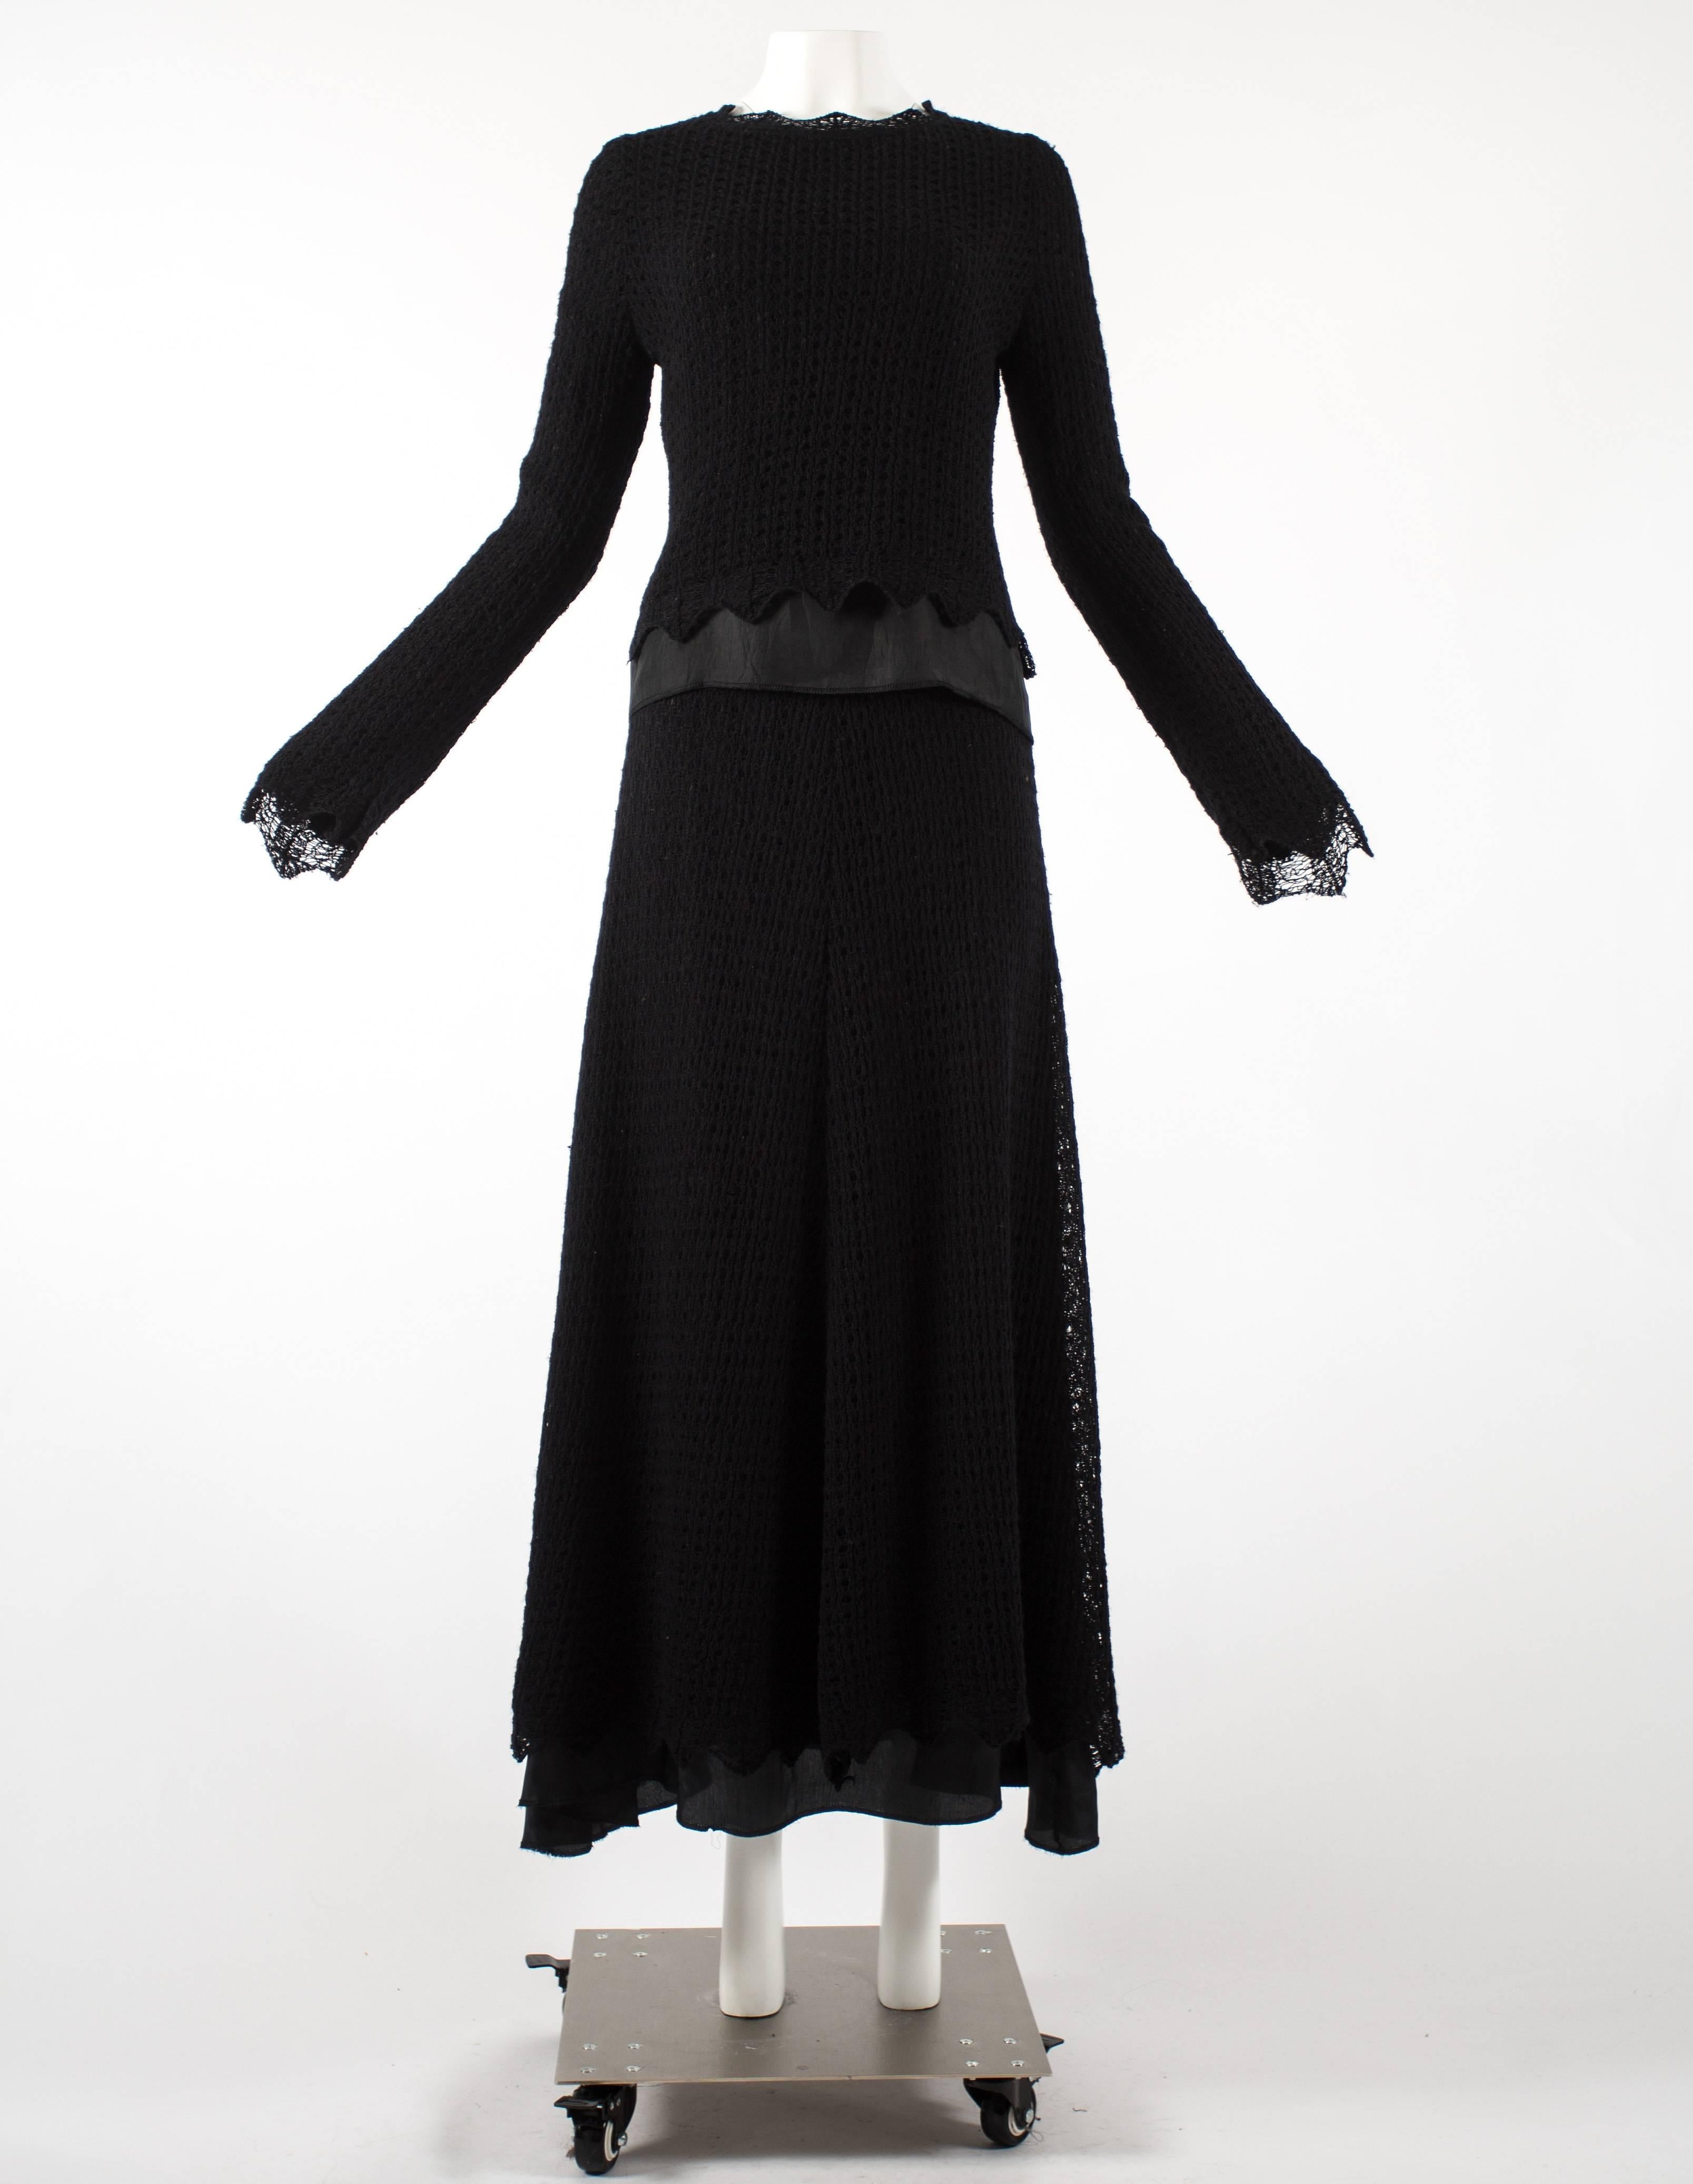 Maison Martin Margiela early 1990s black crochet wool and satin skirt suit

- black crochet wool with exposed black satin lining
- elasticated waist band and metal zip fastening